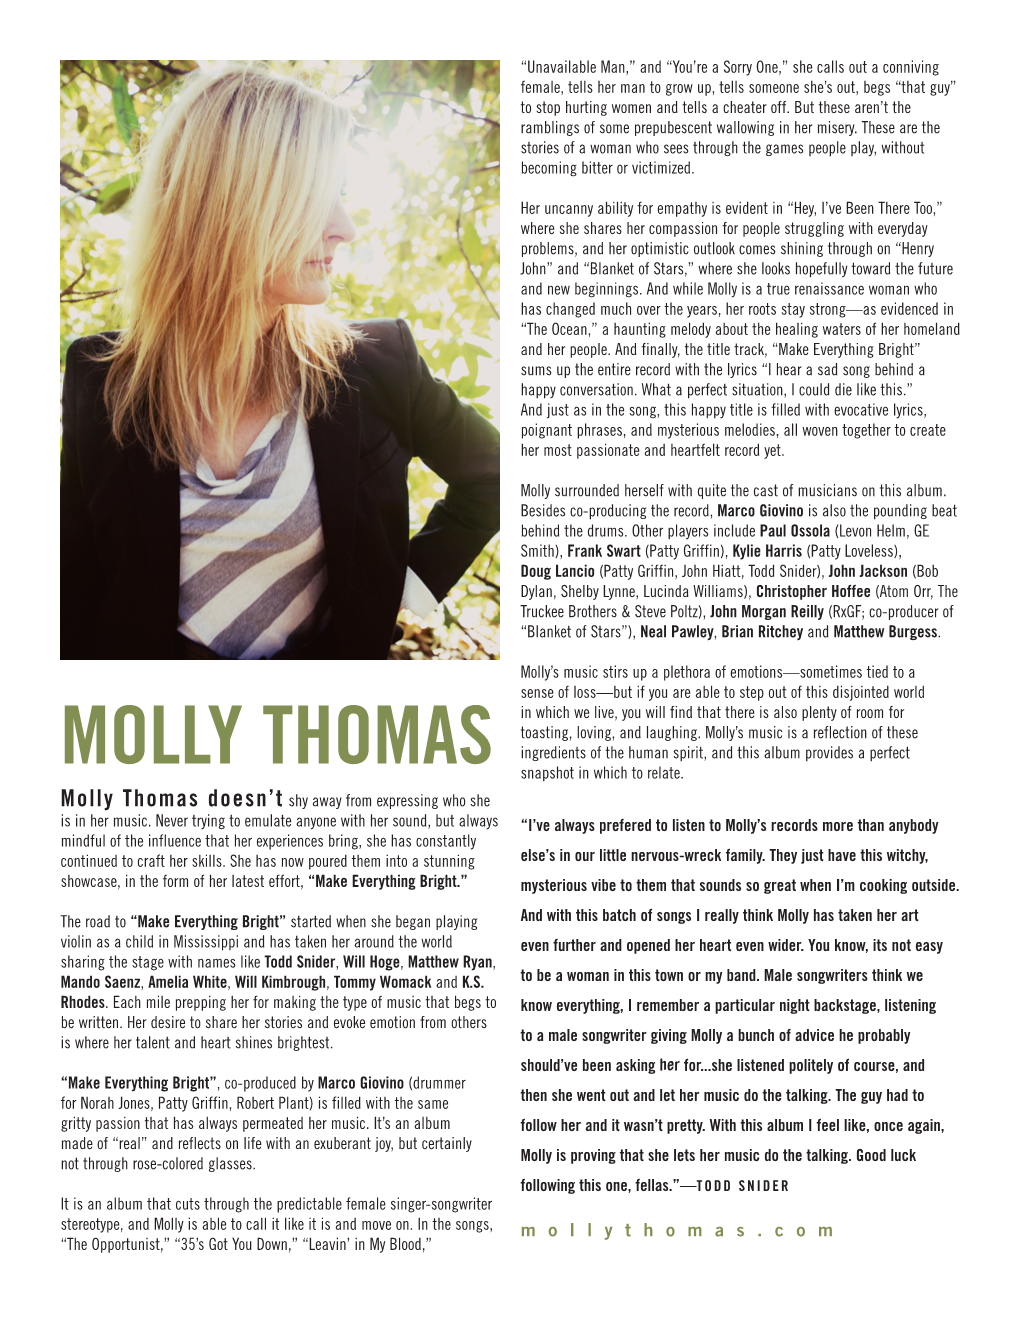 MOLLY THOMAS Ingredients of the Human Spirit, and This Album Provides a Perfect Snapshot in Which to Relate